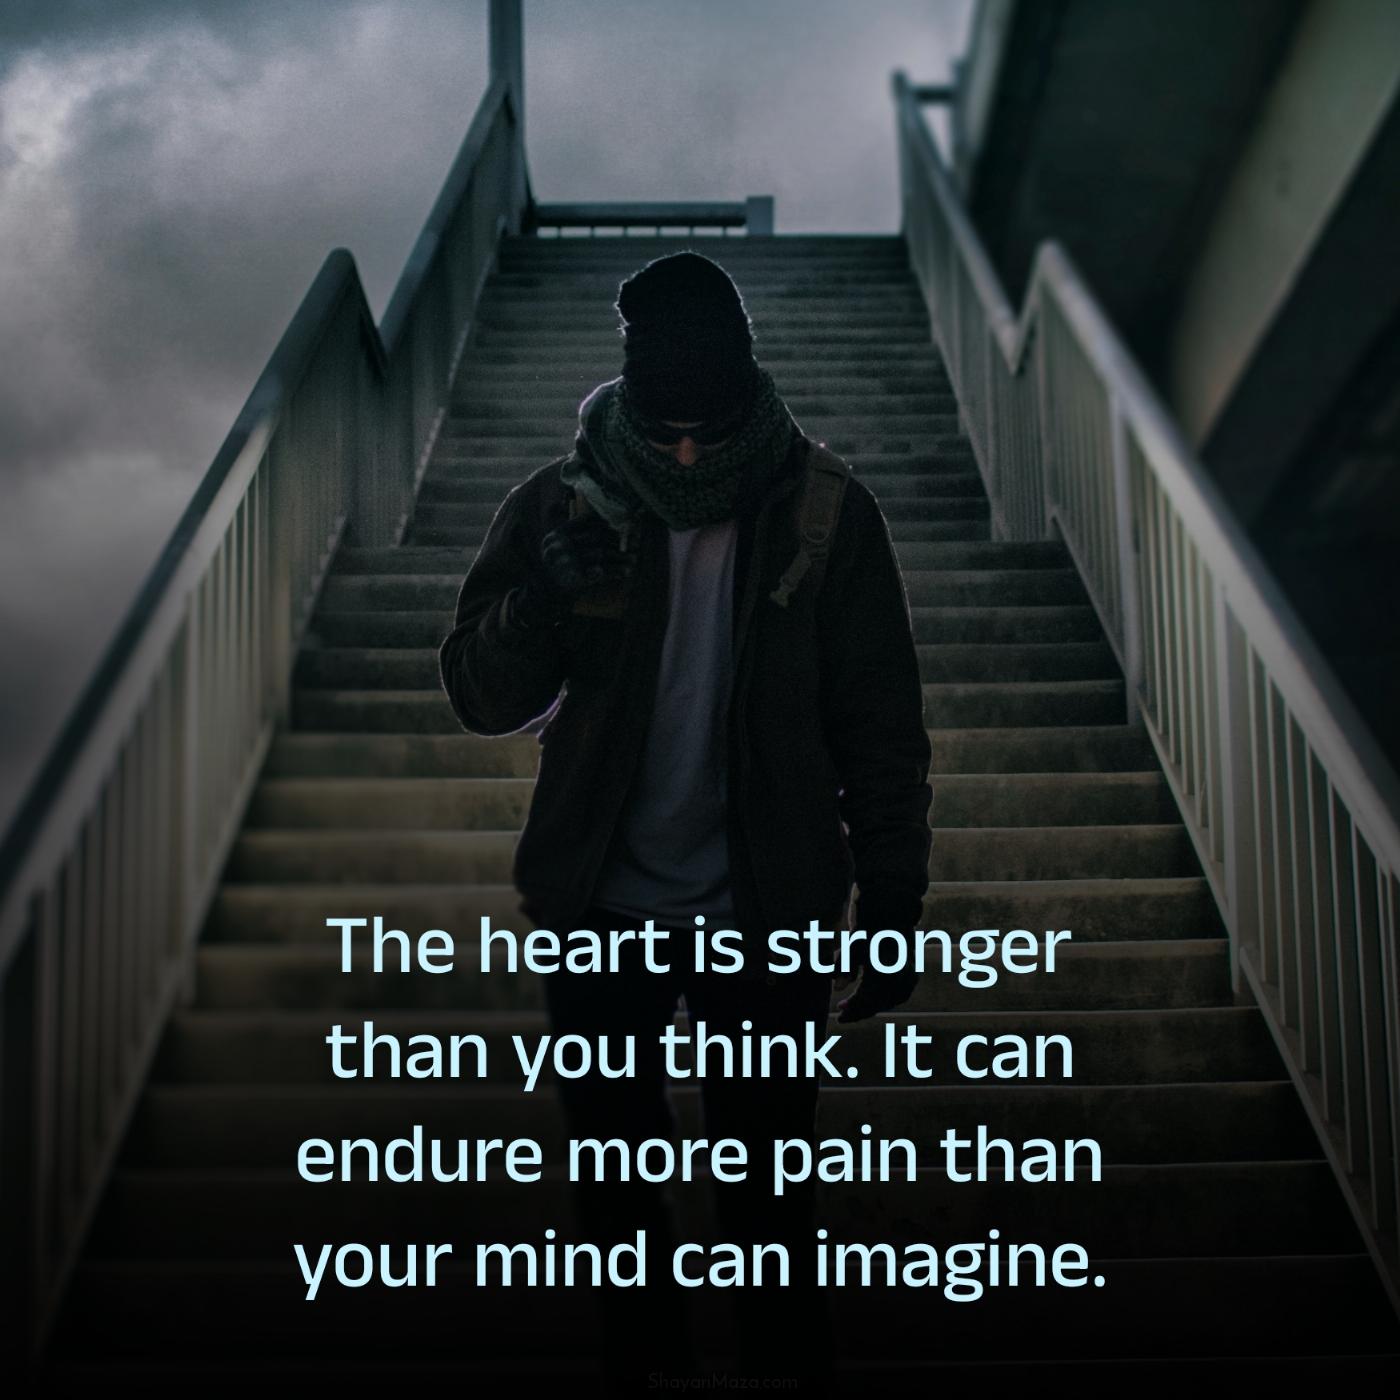 The heart is stronger than you think